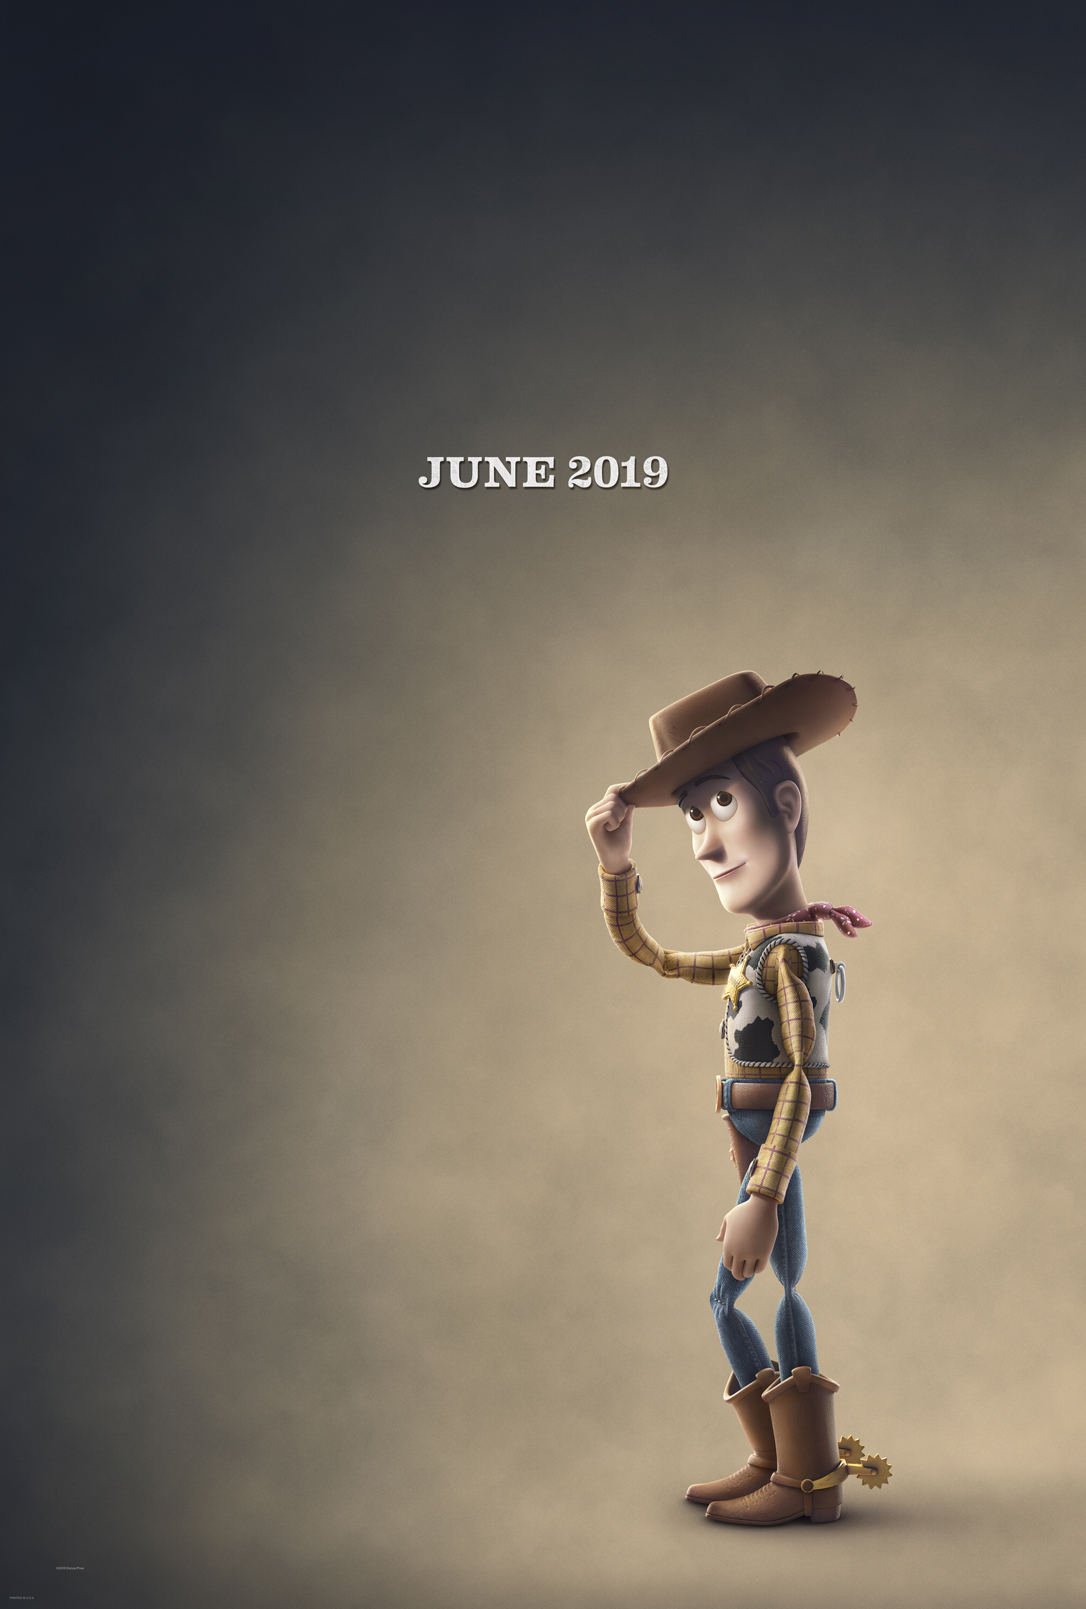 TOY STORY 4 Full Movie Trailer (2019) Young Bonnie Looks Like Moana ! 